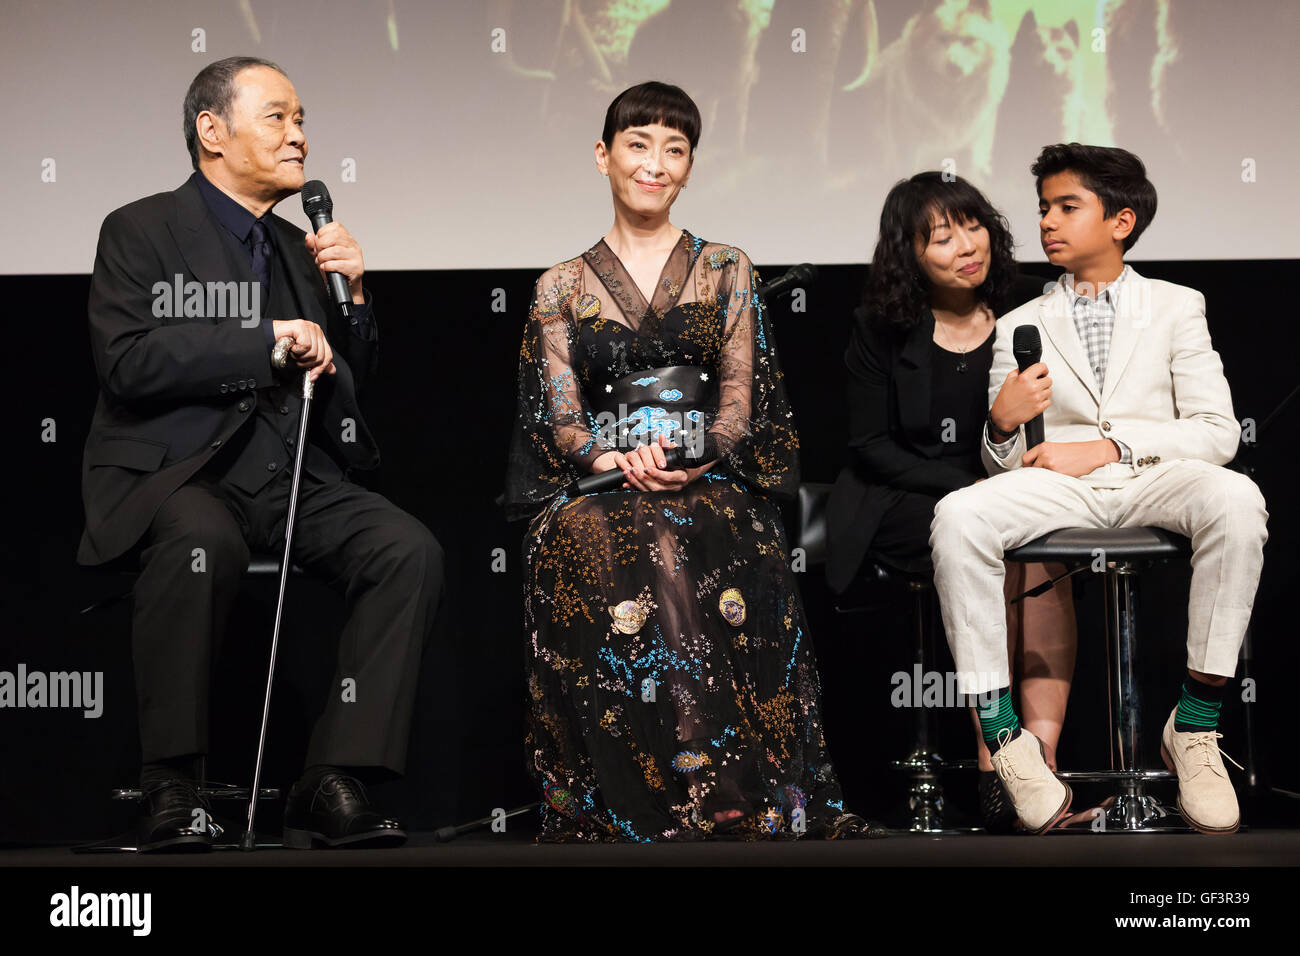 Tokyo, Japan. 27th July, 2016.(L to R) Actor Toshiyuki Nishida, actress Rie Miyazawa and child actor Neel Sethi speak during the Japanese premiere for the film The Jungle Book at Kabuki-za theater in Ginza on July 27, 2016, Tokyo, Japan. Actor Neel Sethi, director Jon Favreau, producer Brigham Taylor and Japanese voice cast appeared on the stage to greet the fans. The movie will be released in Japan on August 11. Credit:  Rodrigo Reyes Marin/AFLO/Alamy Live News Stock Photo